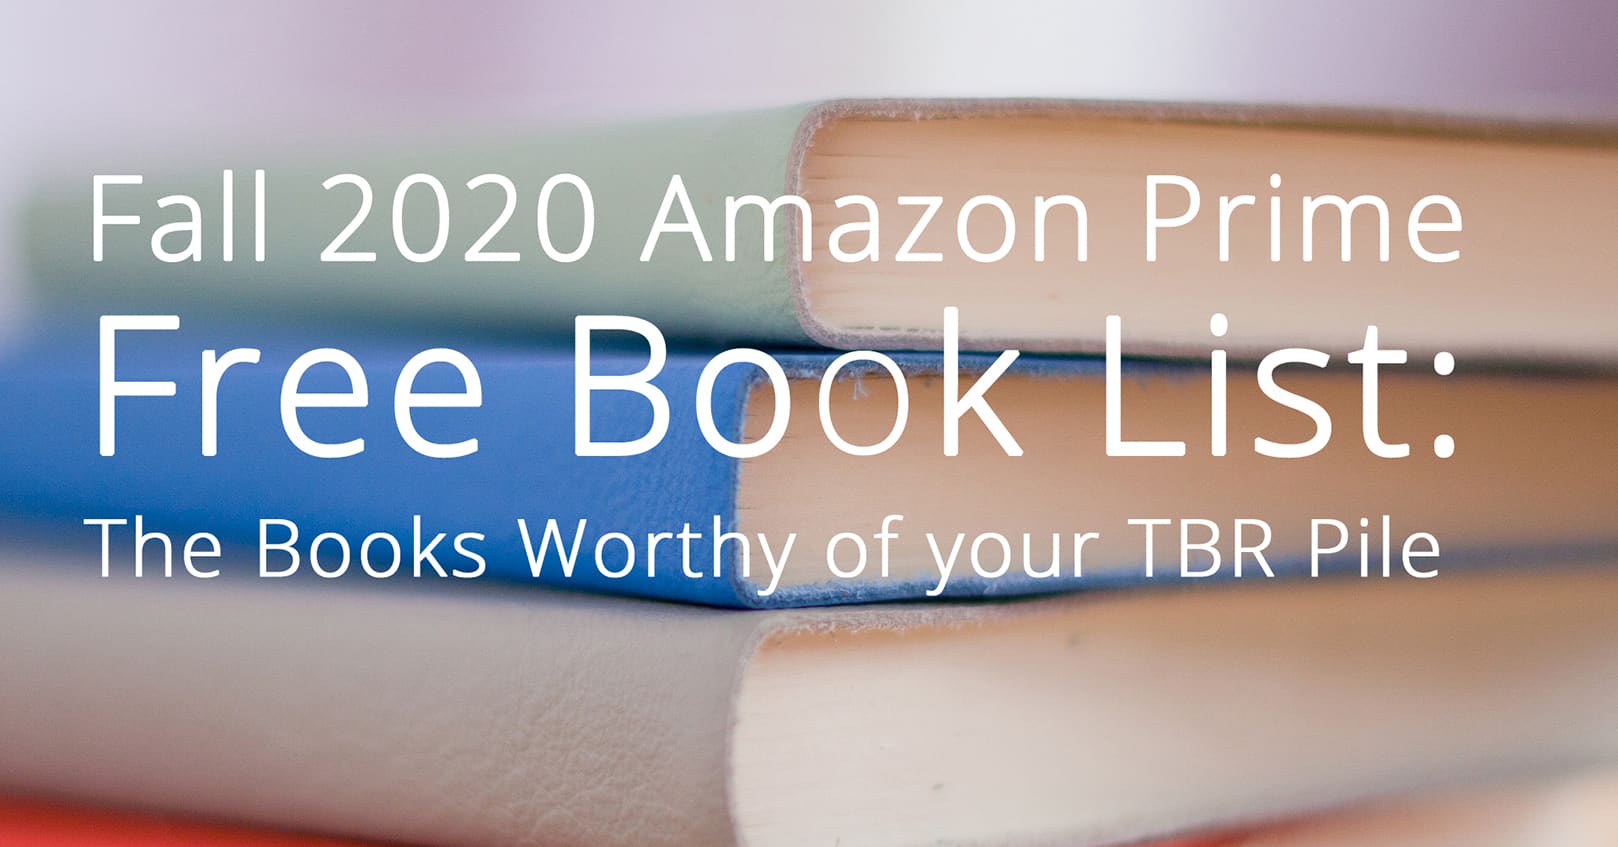 Fall 2020 Amazon Prime Free Book List: The Books Worthy of your TBR Pile